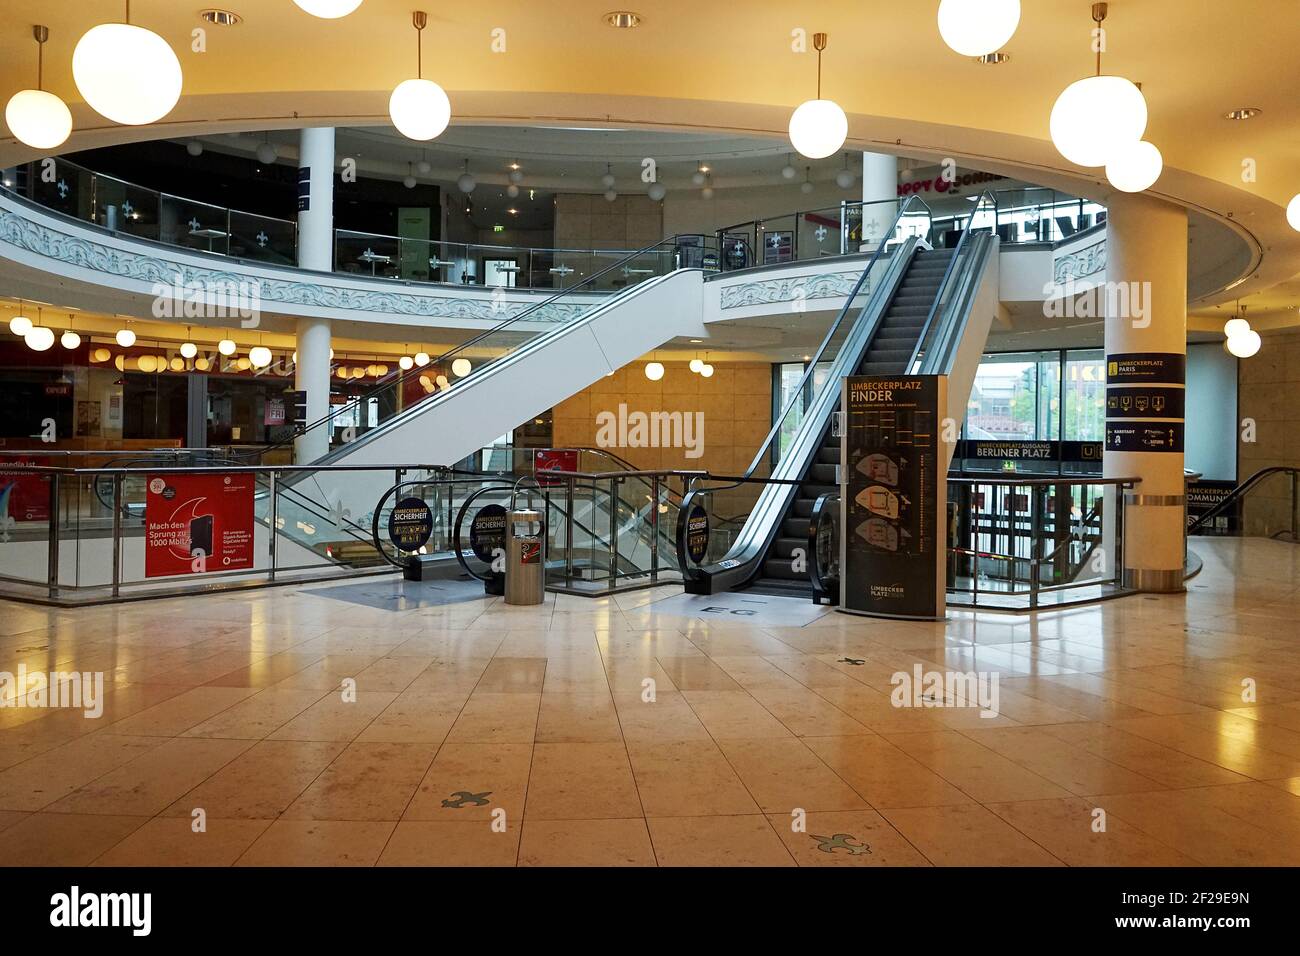 The City Center, shopping mall in Essen Stadtmitte is empty without customers, NRW, Germany, Europe, April 2020, false virus alarm harms economy. Stock Photo